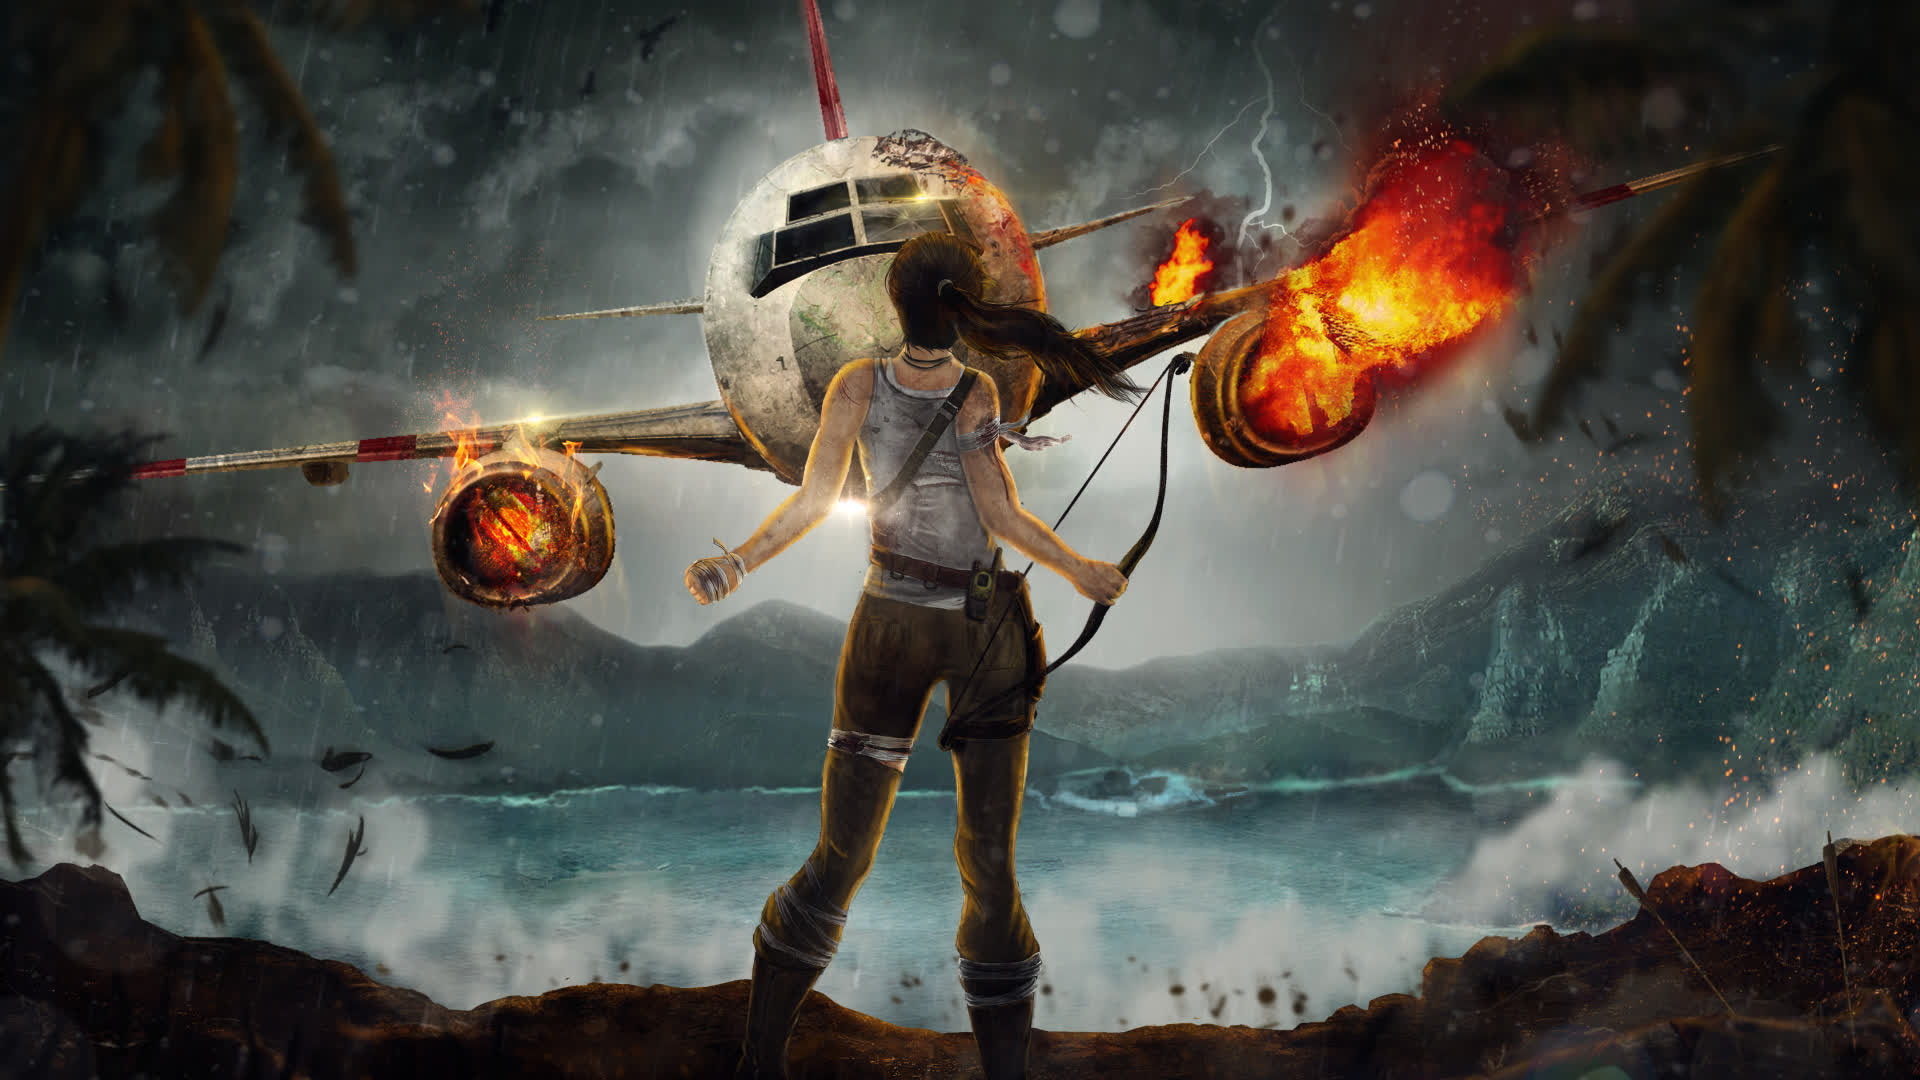 Amazon orders Tomb Raider TV series for Prime Video following Fallout's success